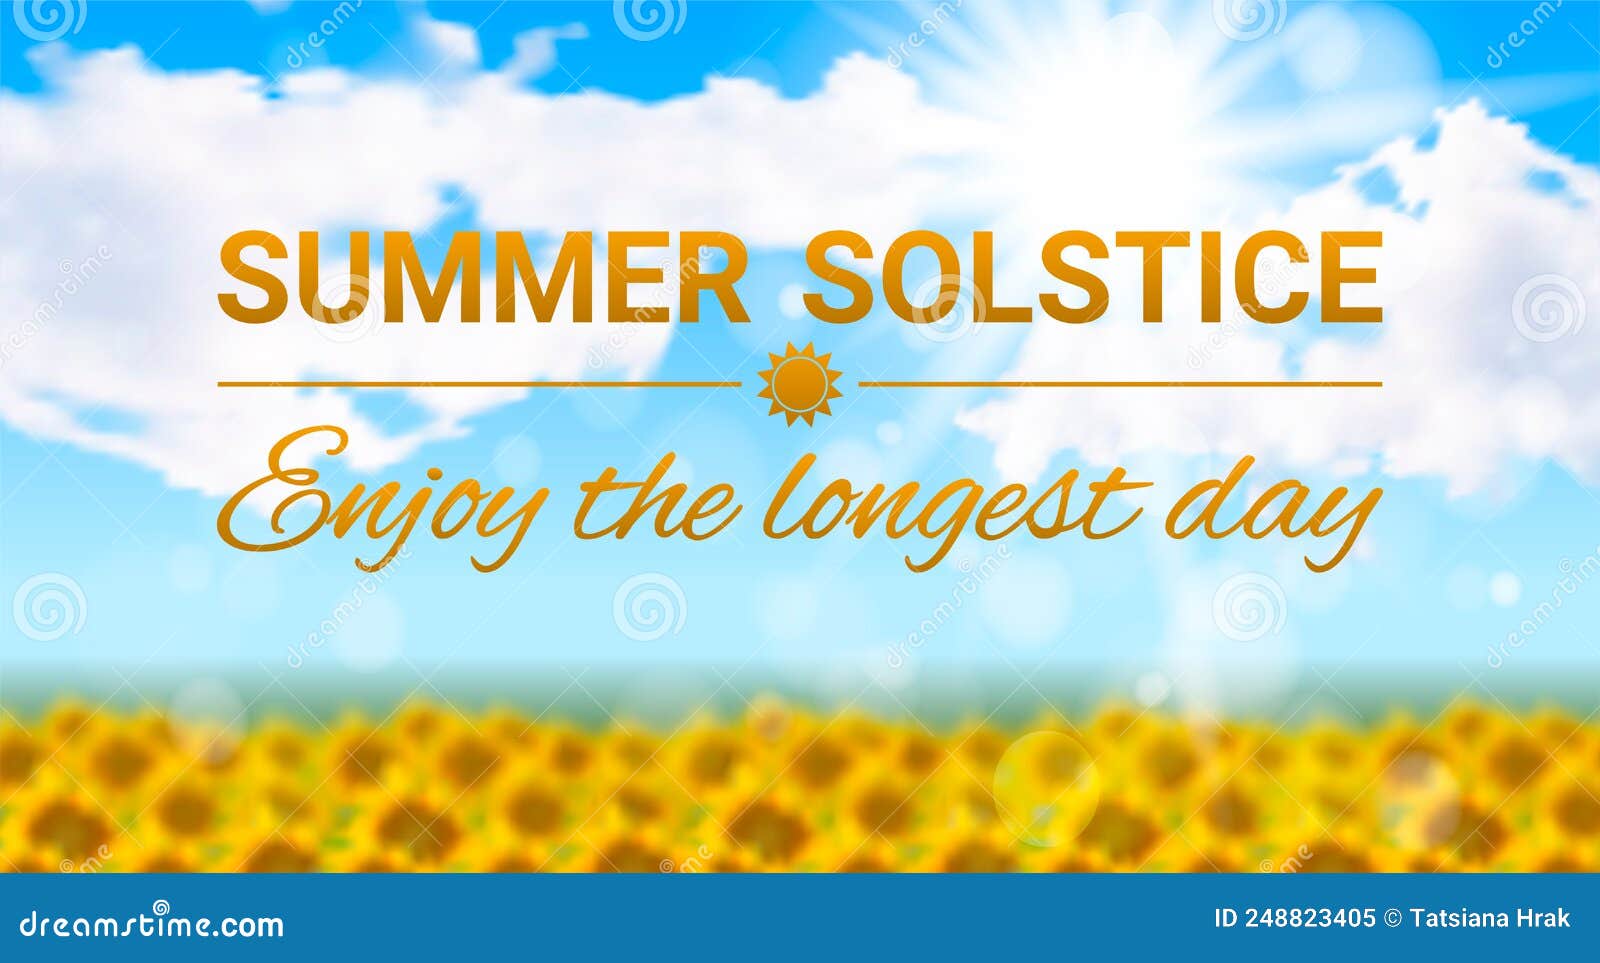 Free images summer solstice